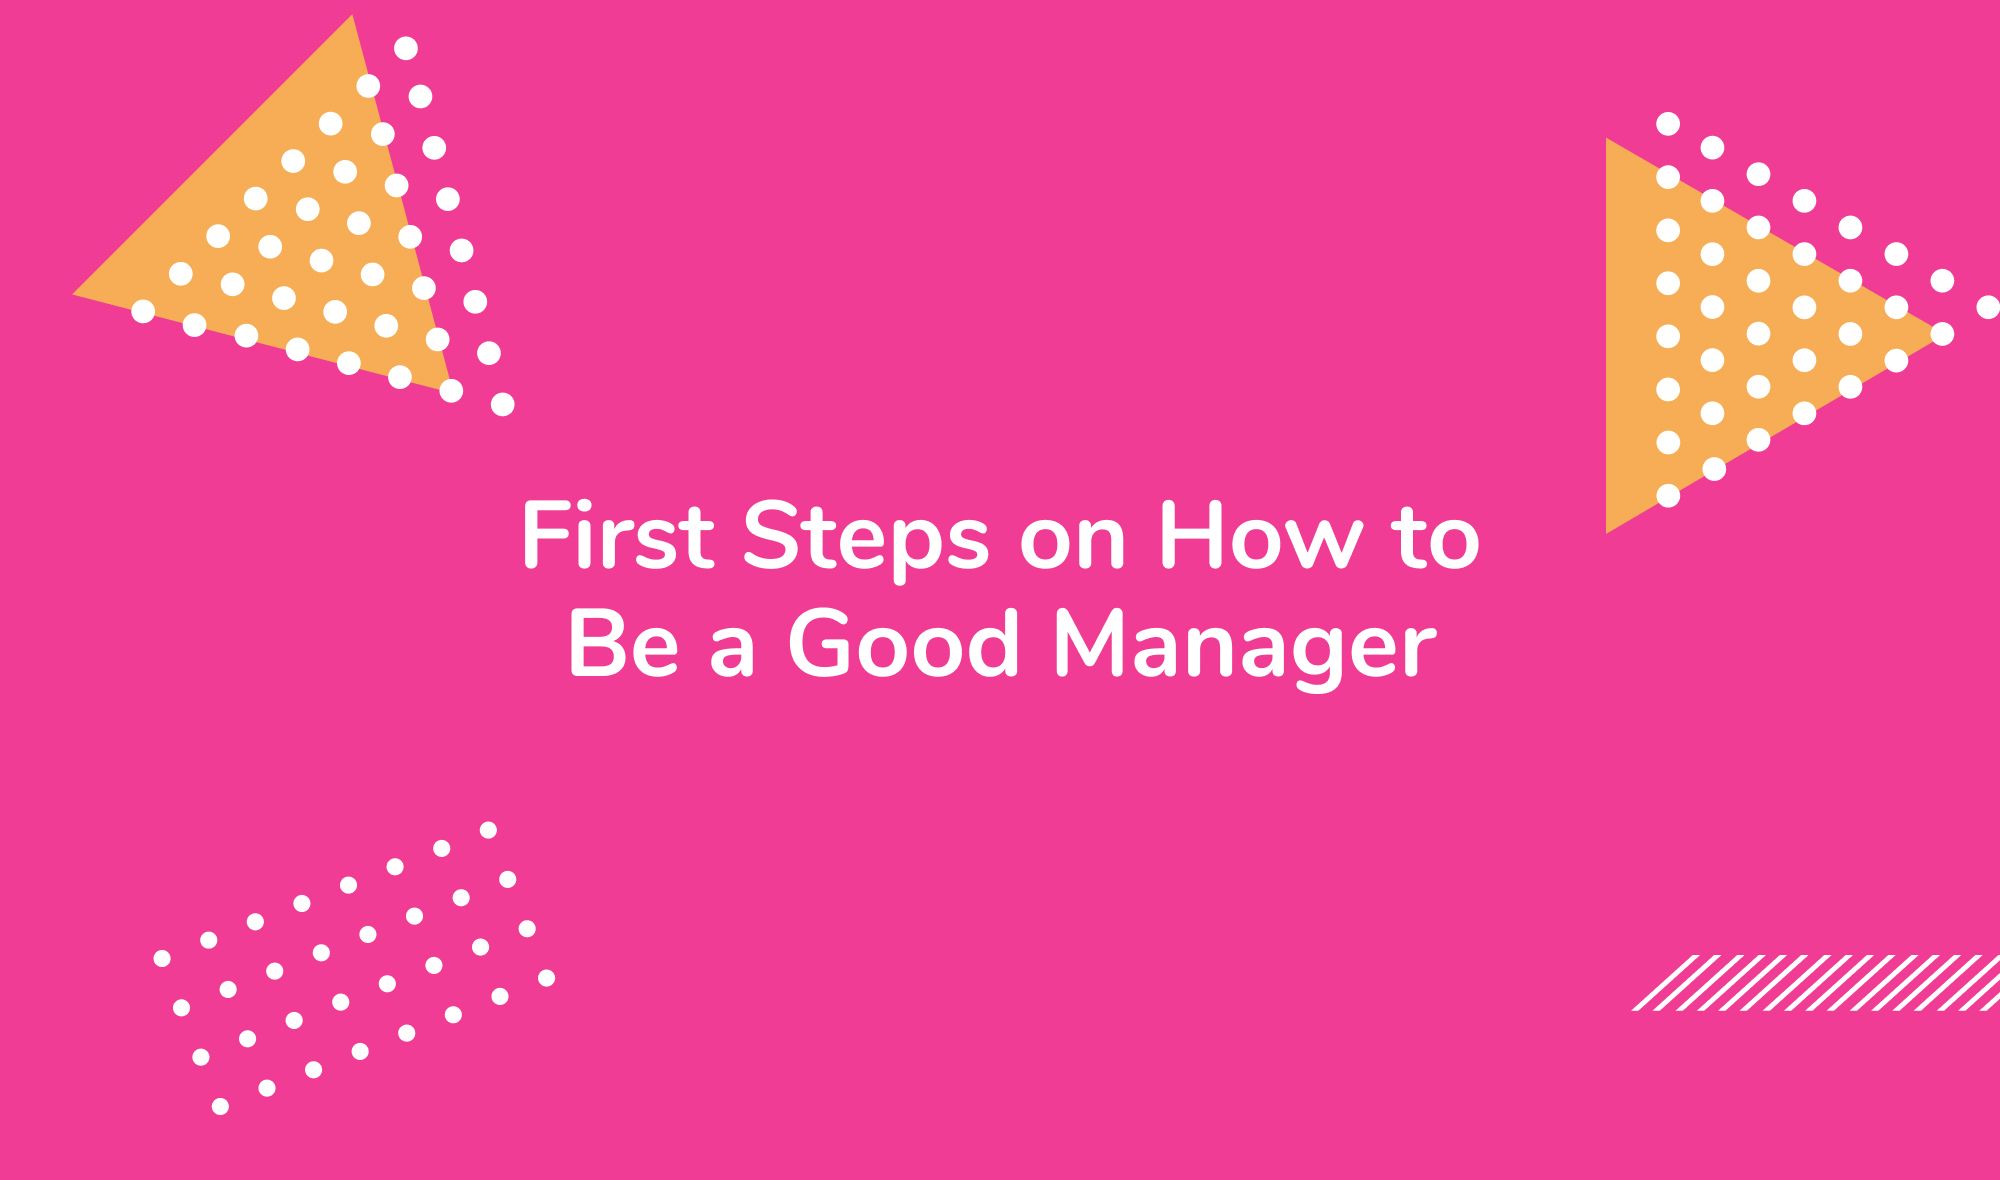 First Steps on How to Be a Good Manager